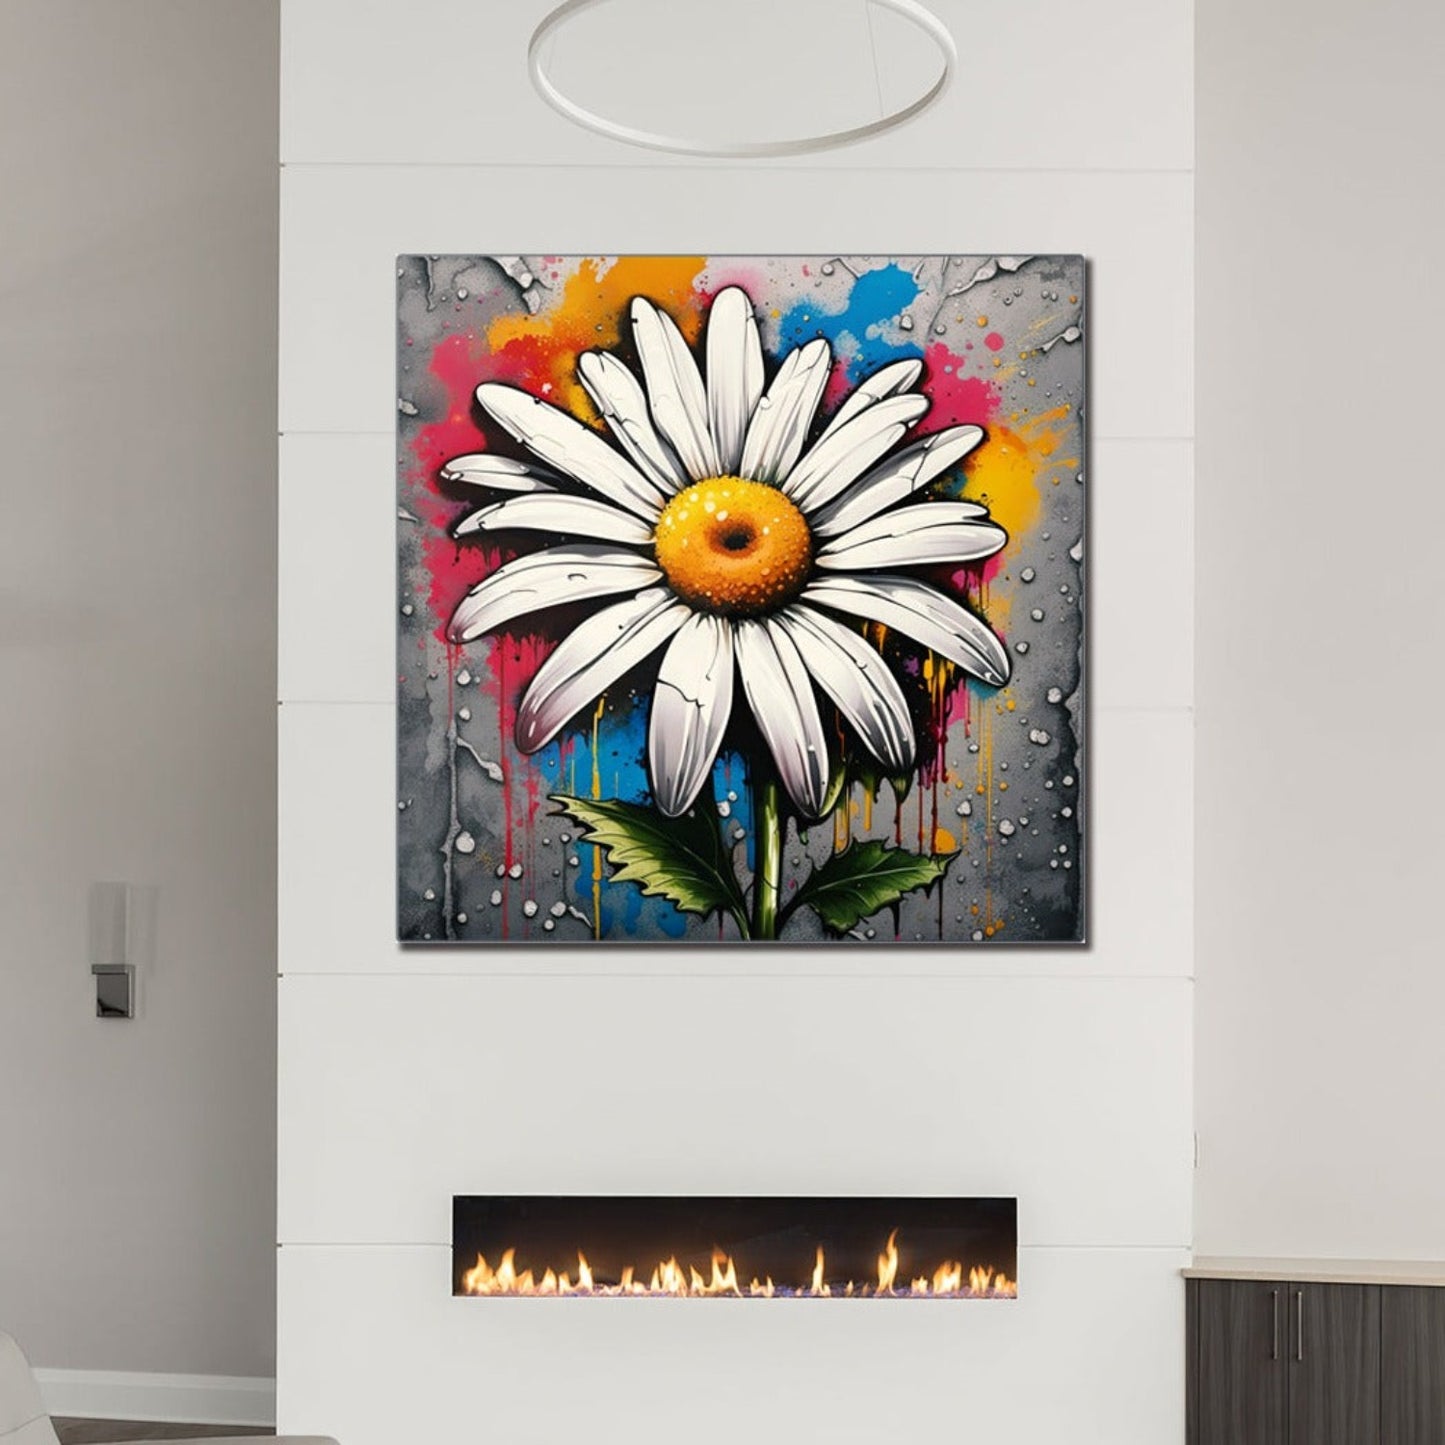 Street Art Style Daisy Printed on Recycled Aluminum hung above fireplace